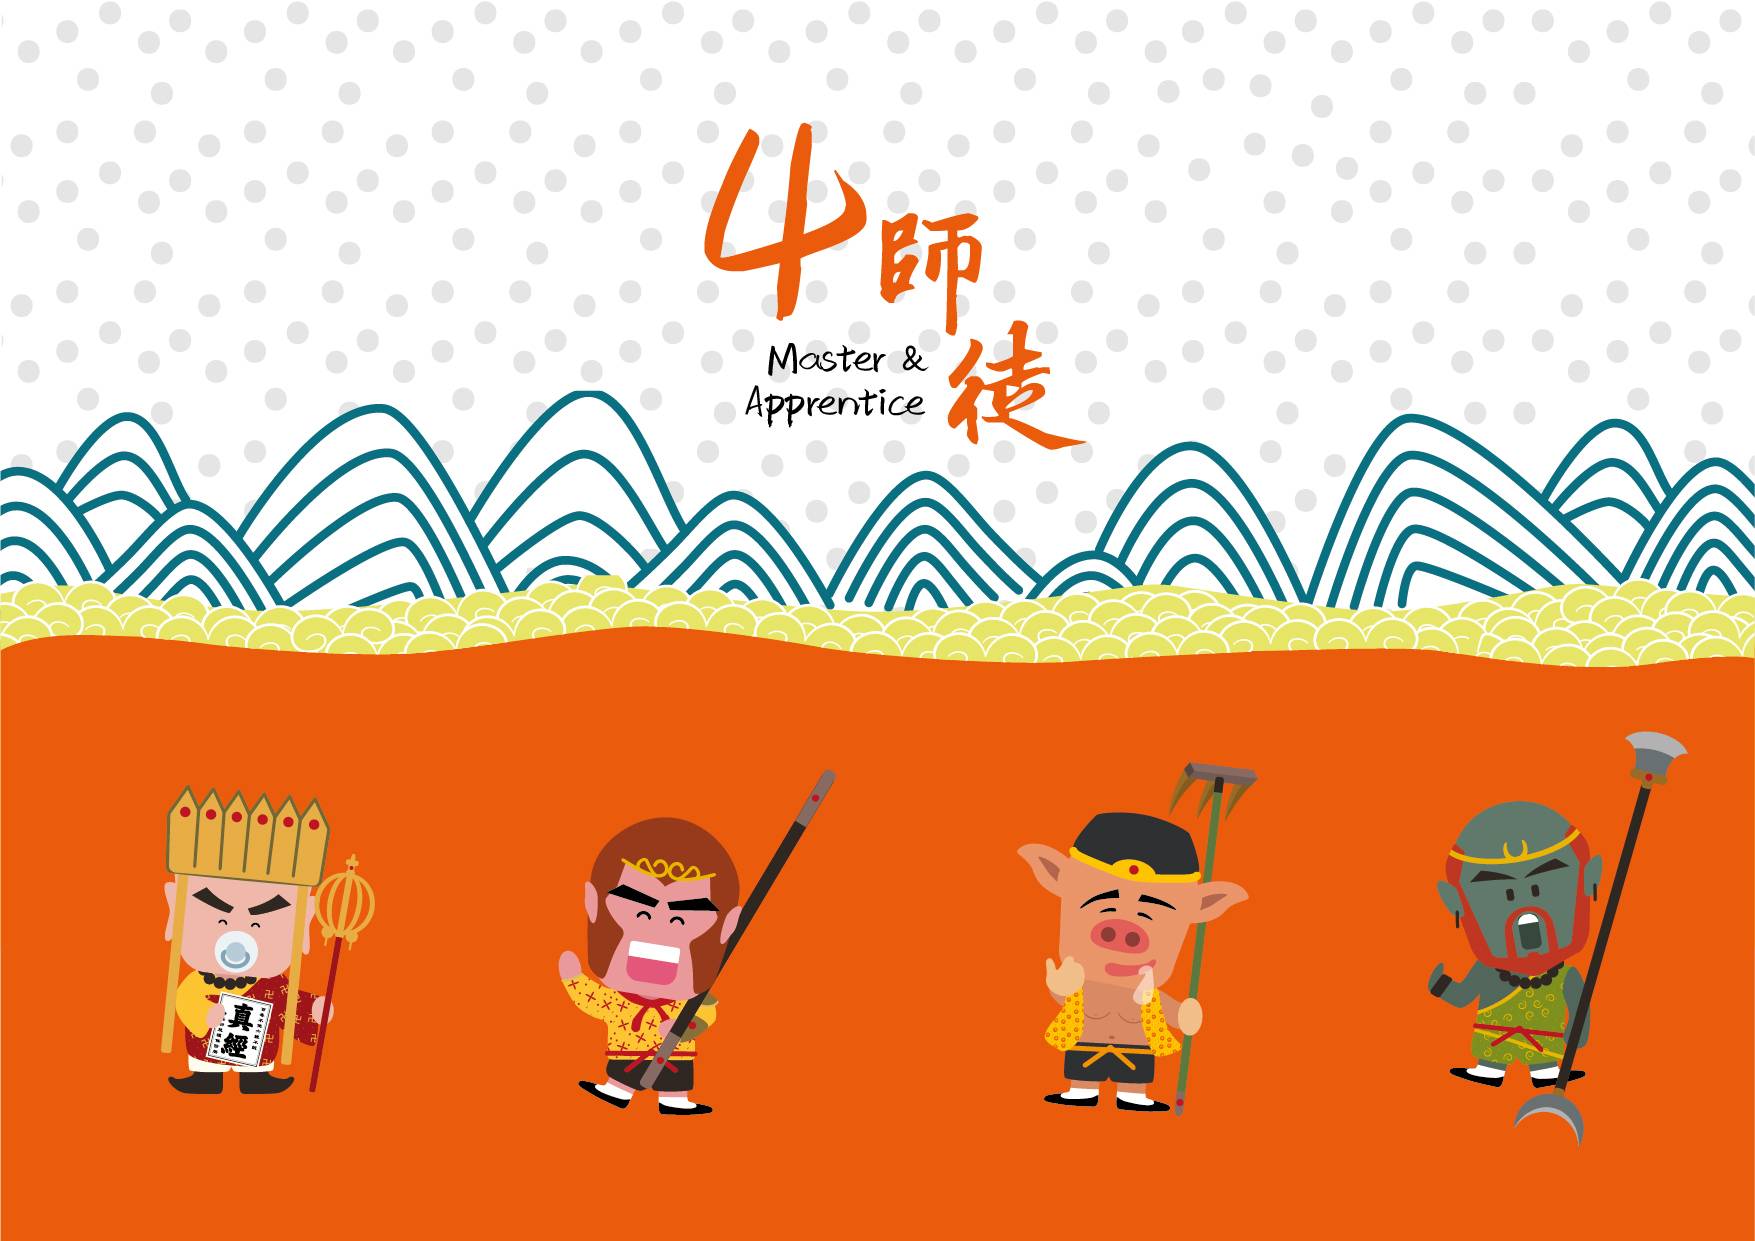 3m posters for Journey to the West with 4 Master & Apprentice mascot illustration